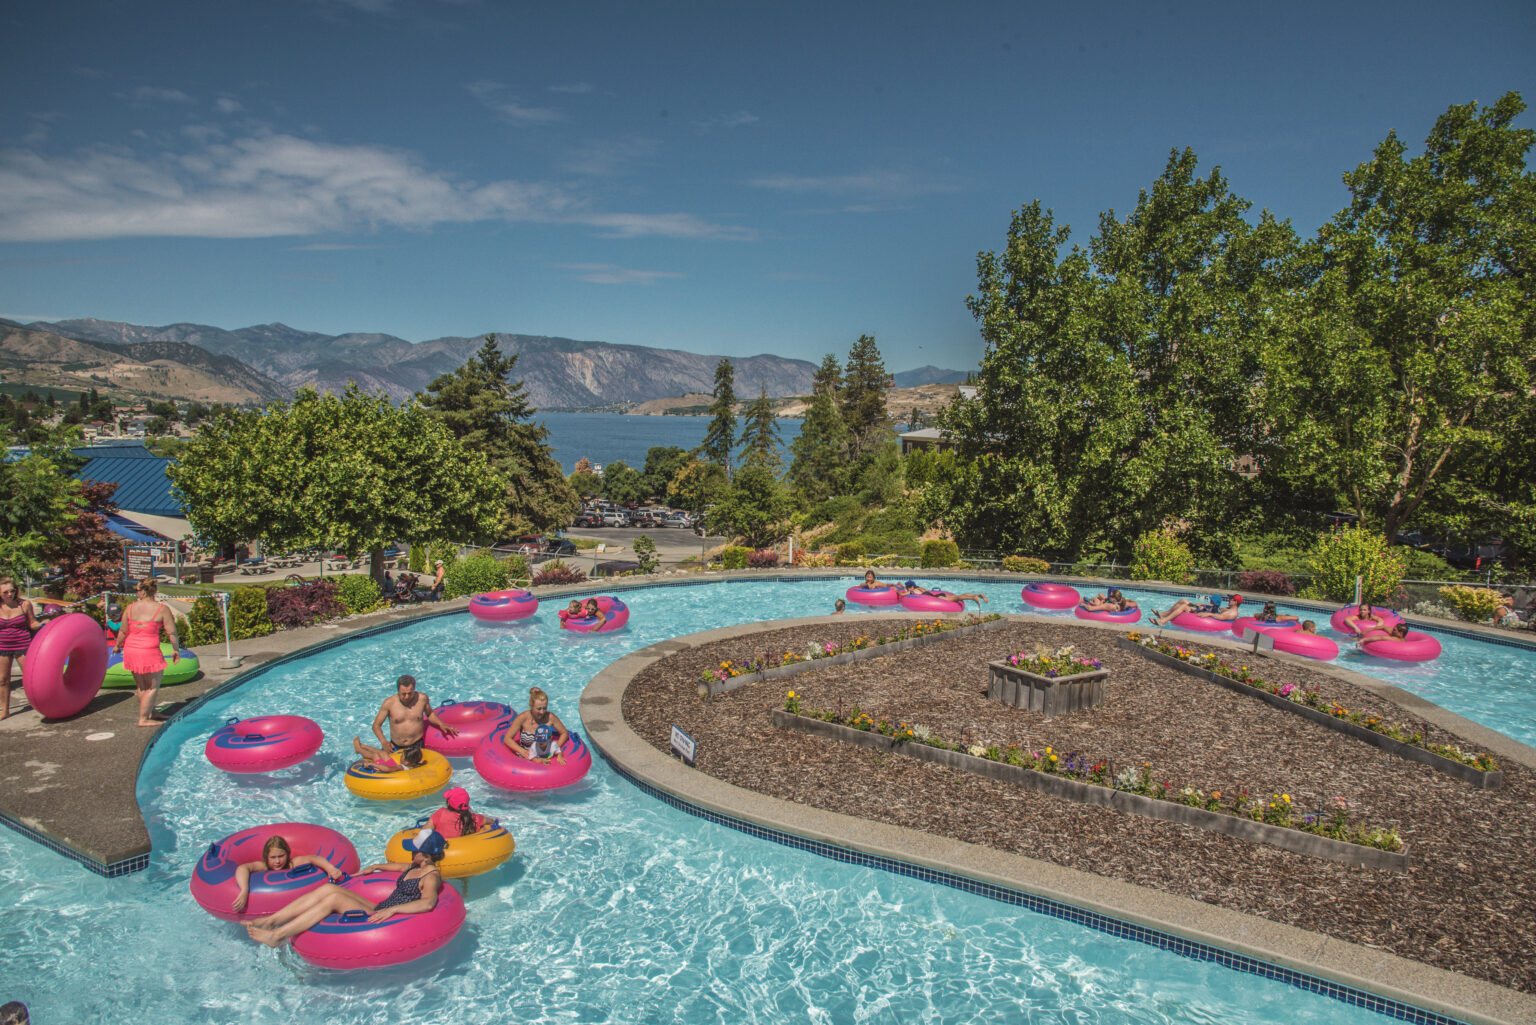 Lake Chelan Family Guide Where to Stay, What to Do & Where to Eat